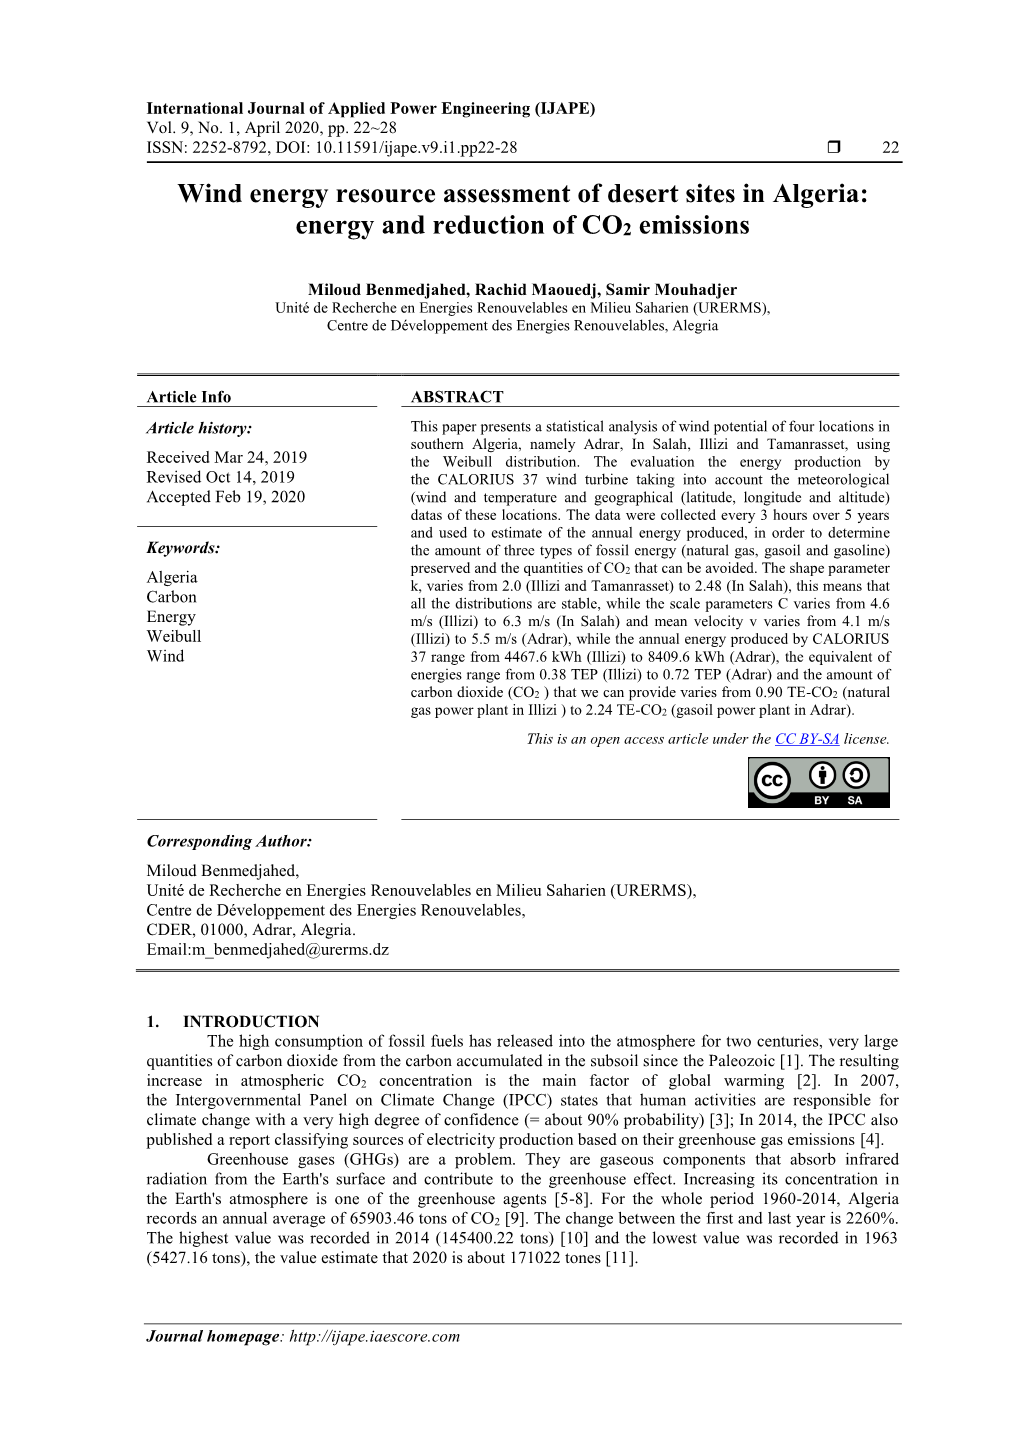 Wind Energy Resource Assessment of Desert Sites in Algeria: Energy and Reduction of CO2 Emissions